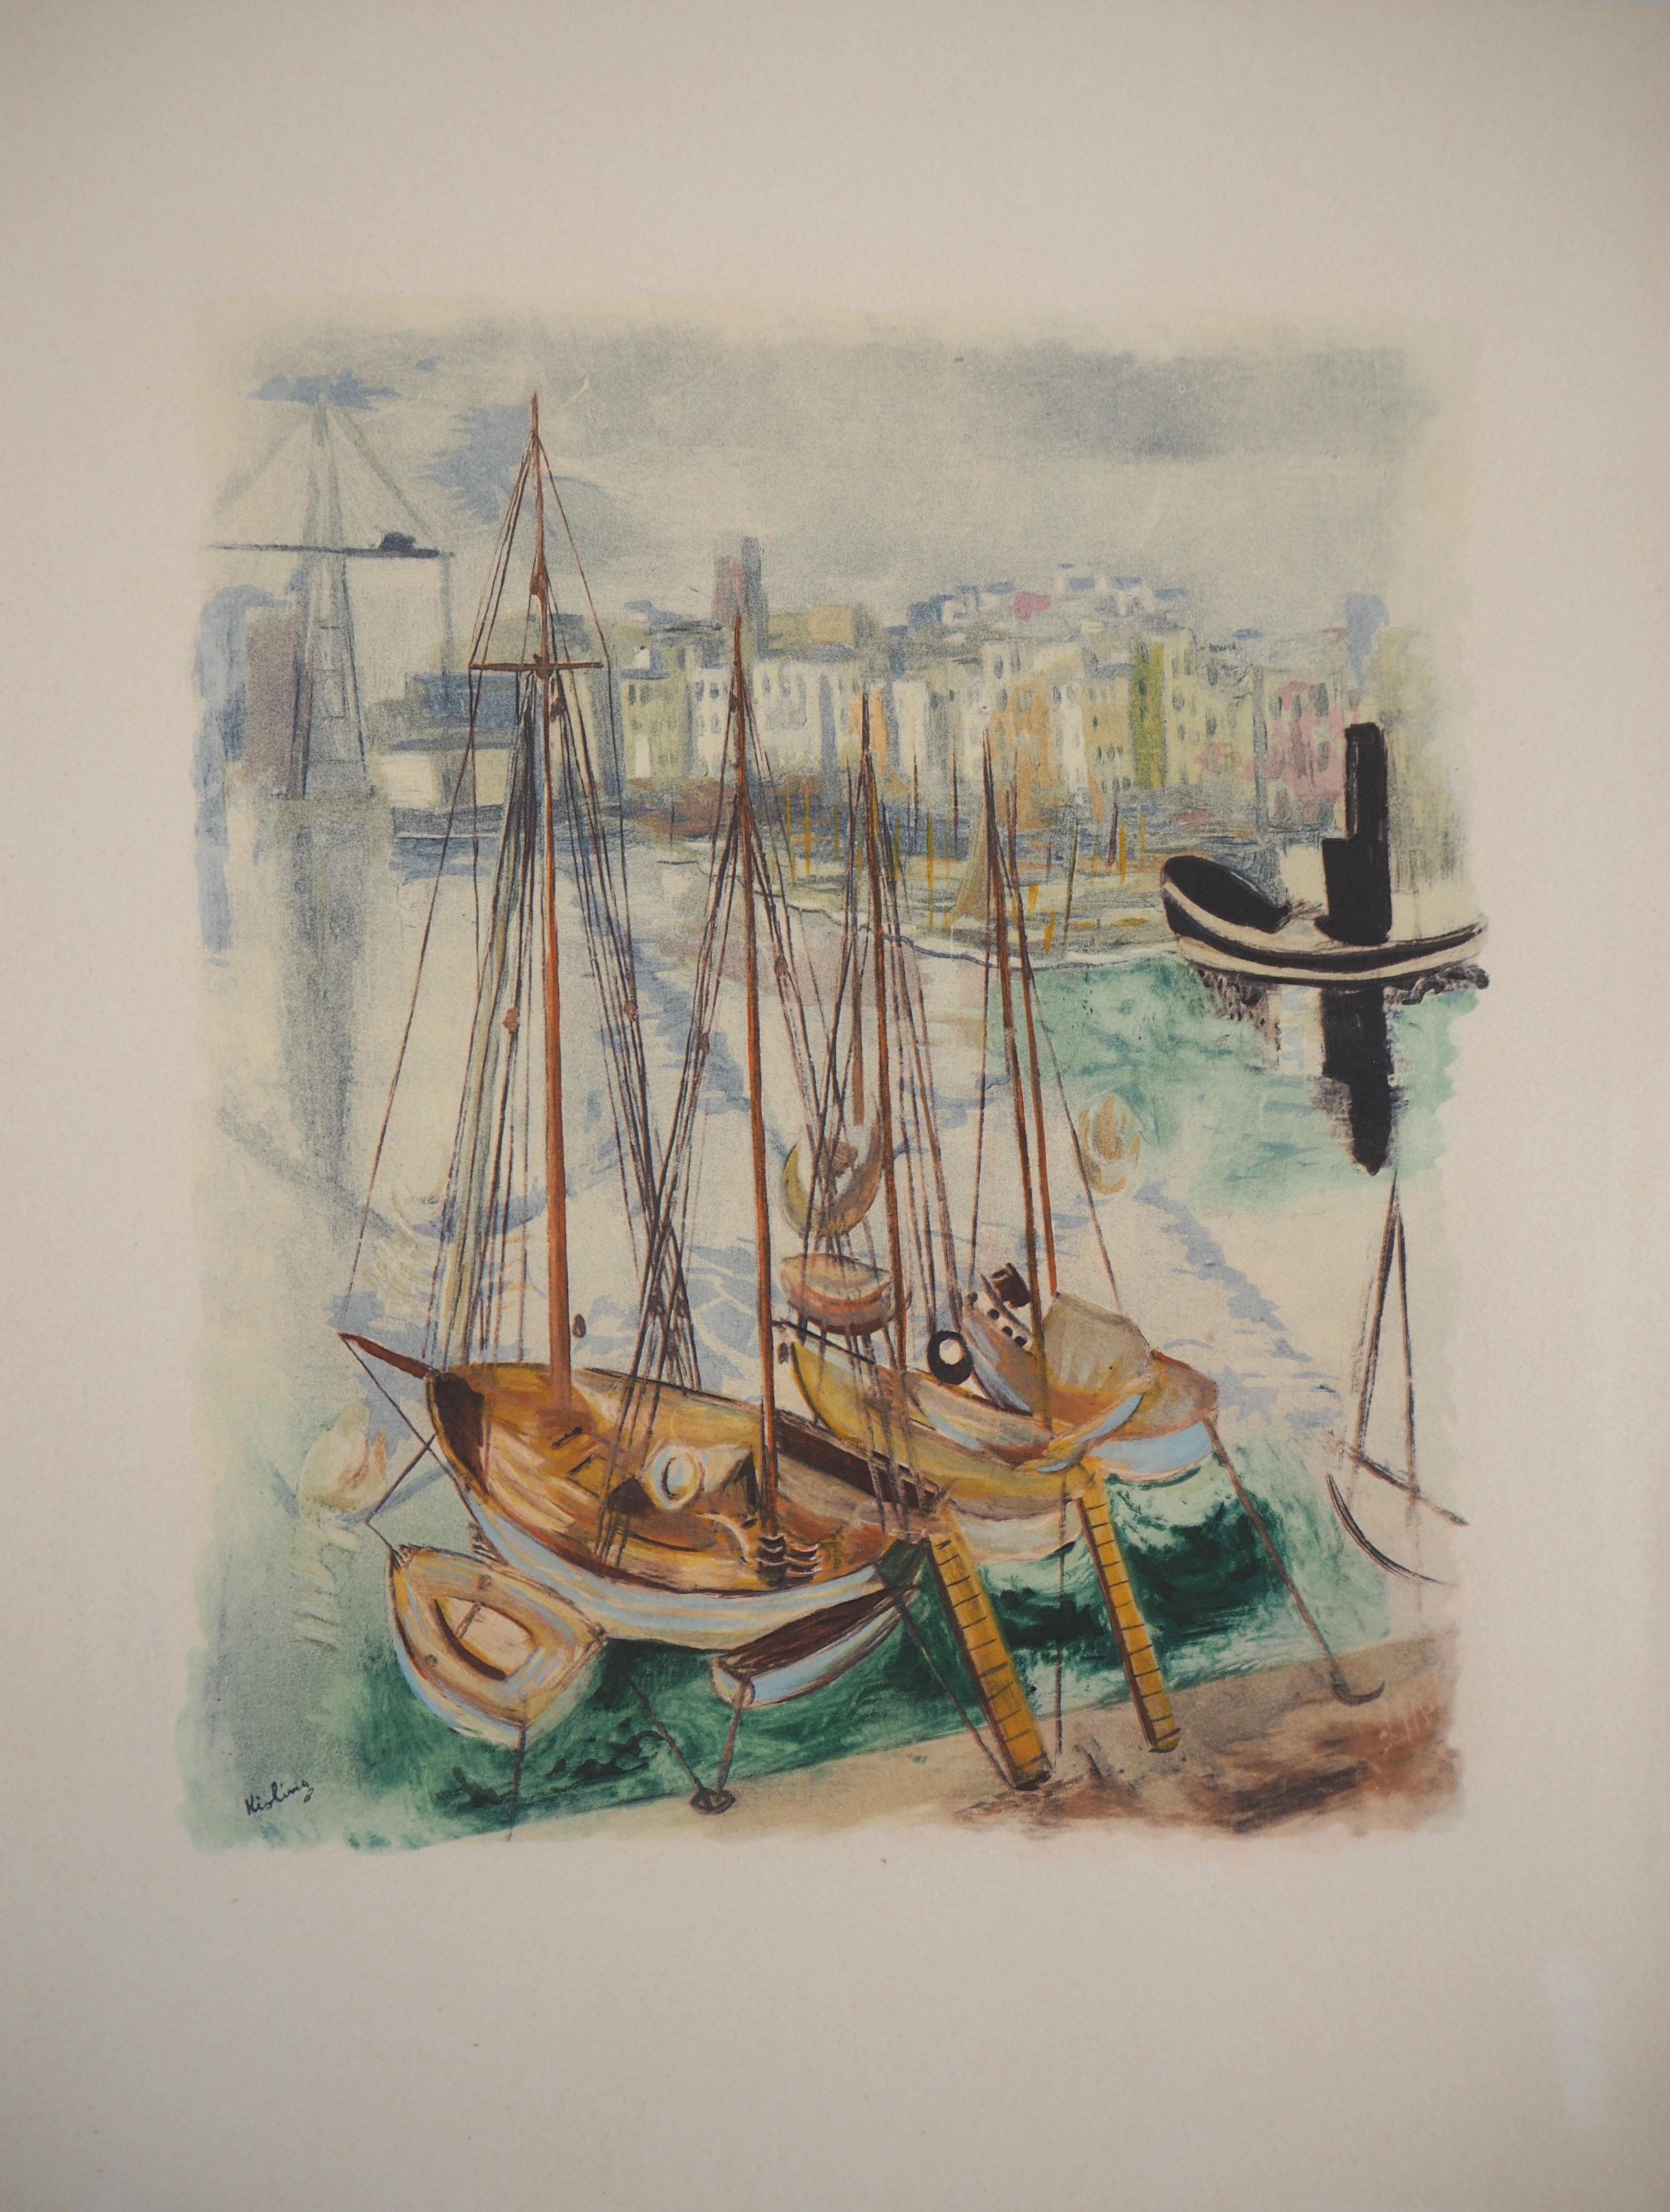 Moise Kisling Landscape Print - Sailing Boats in French Harbour - Original Lithograph